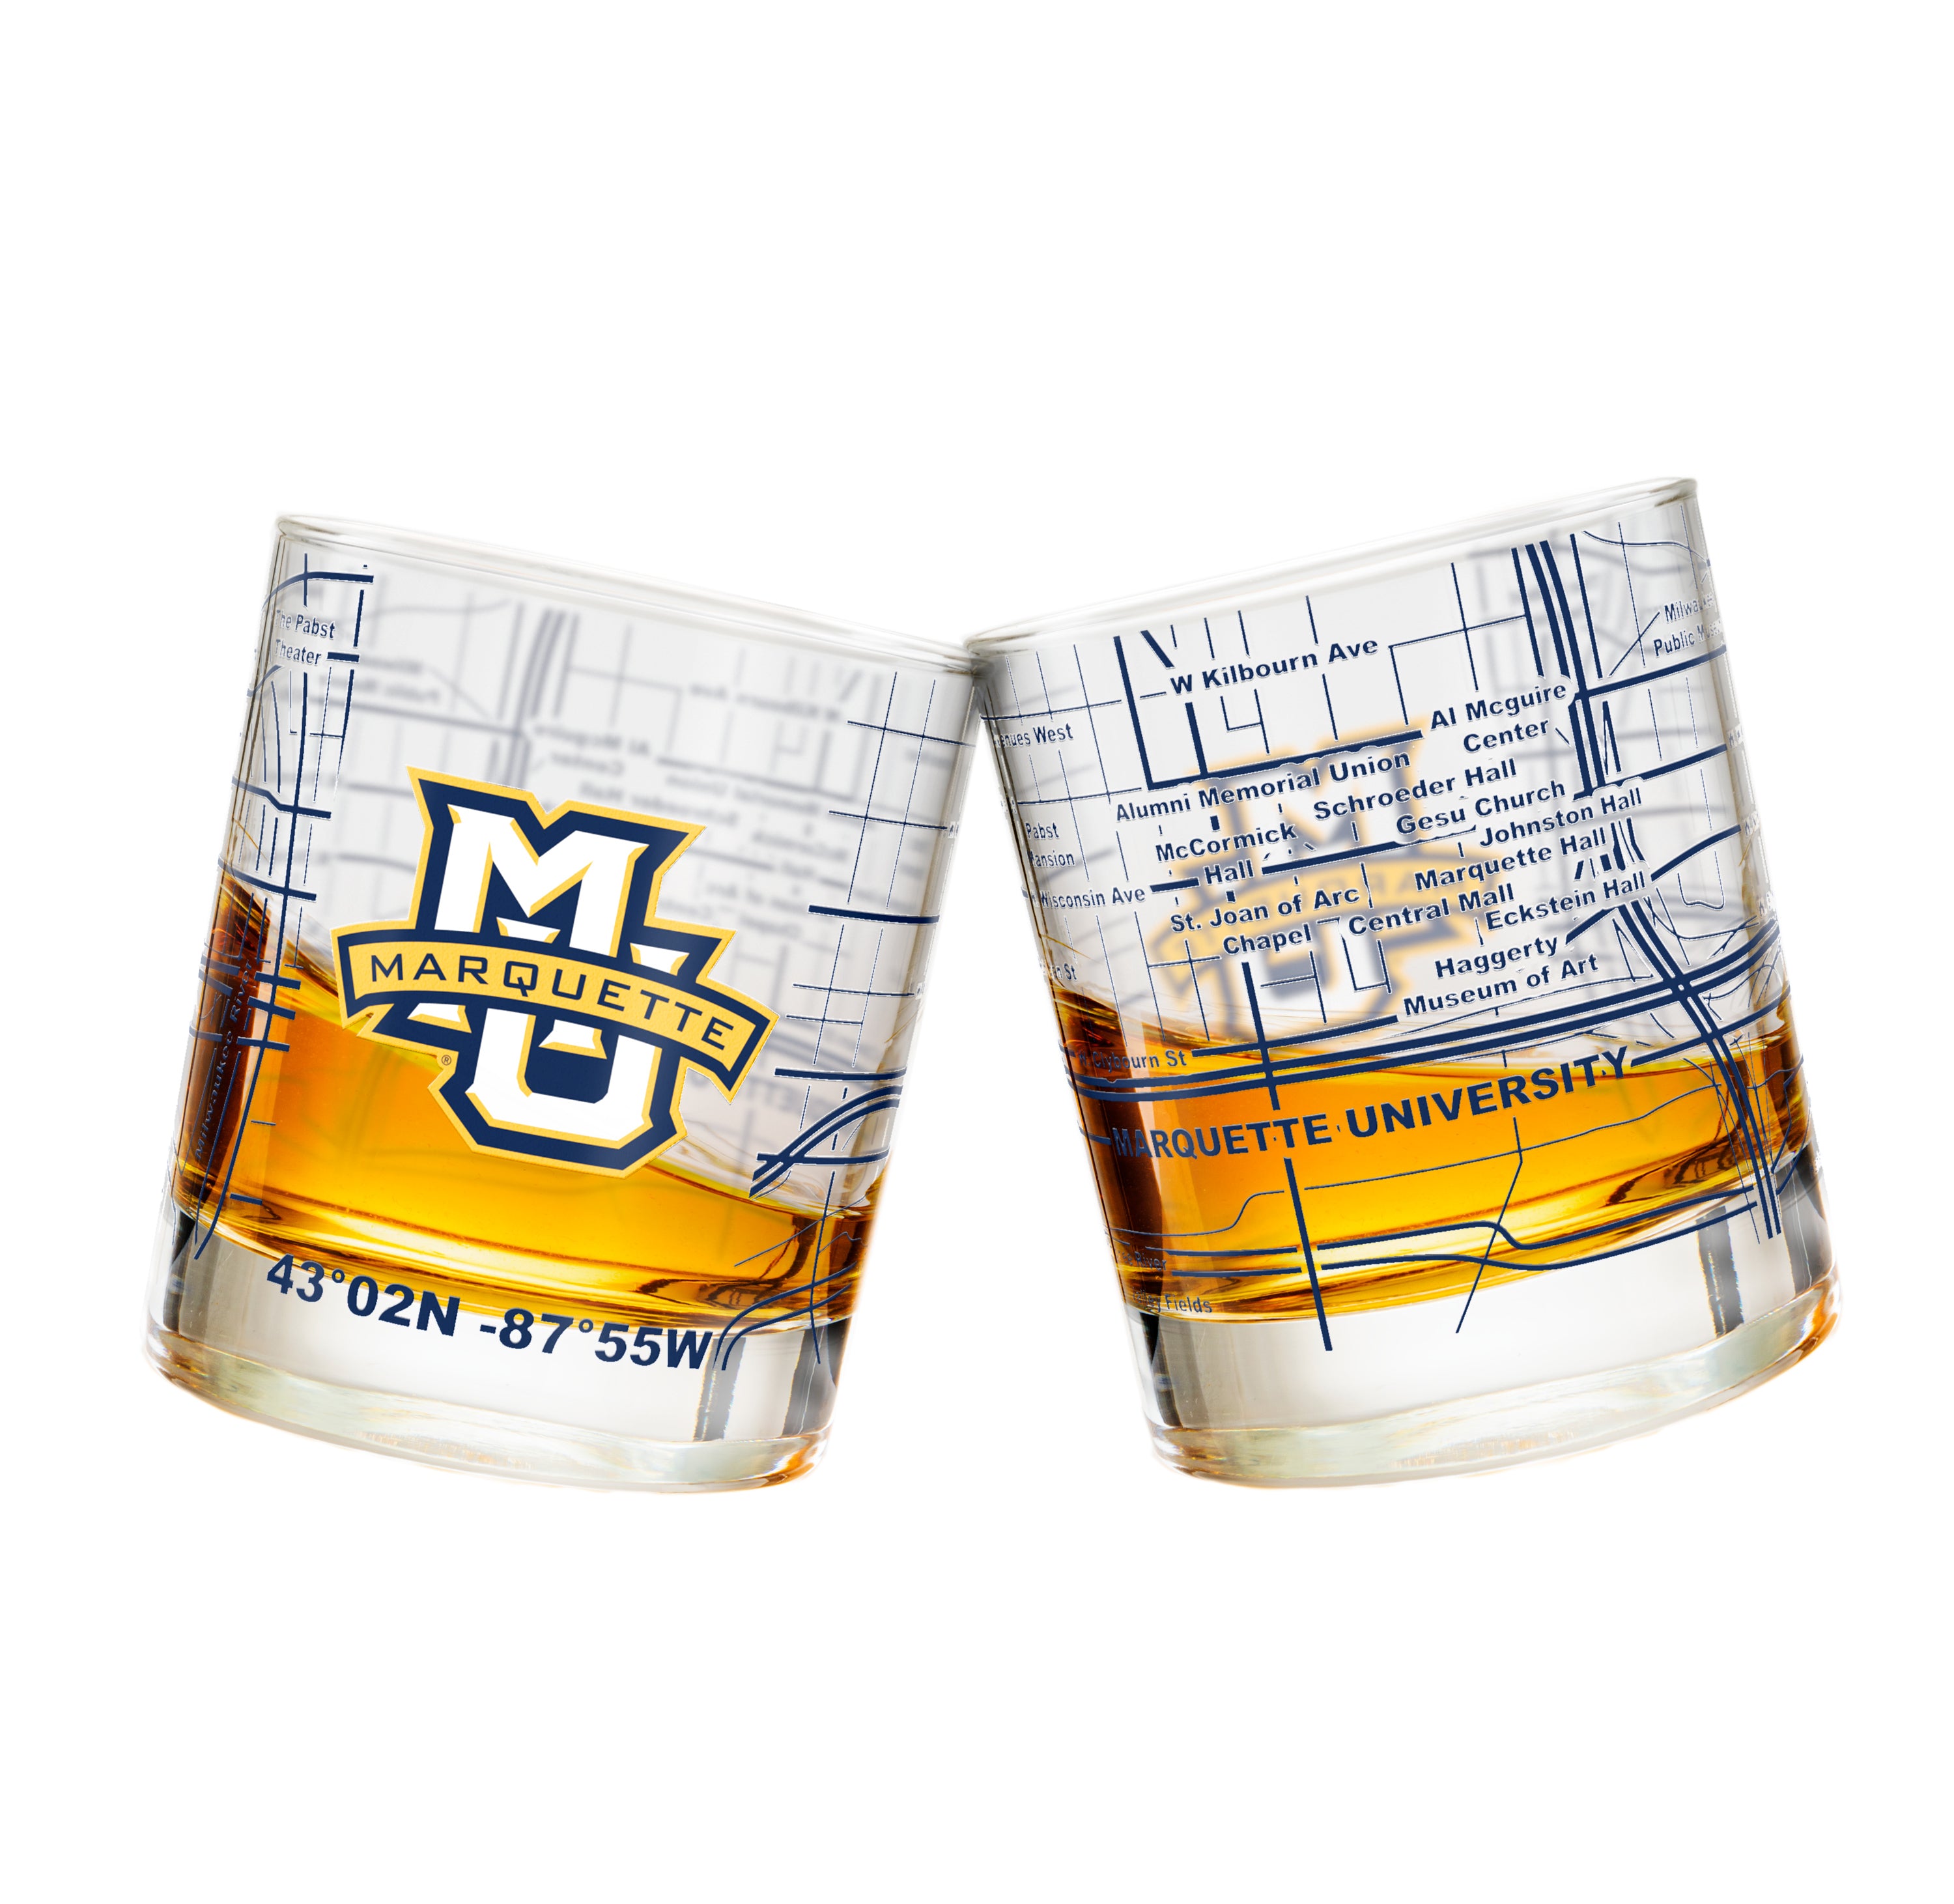 National Mall Pint Glass, Beer Glasses